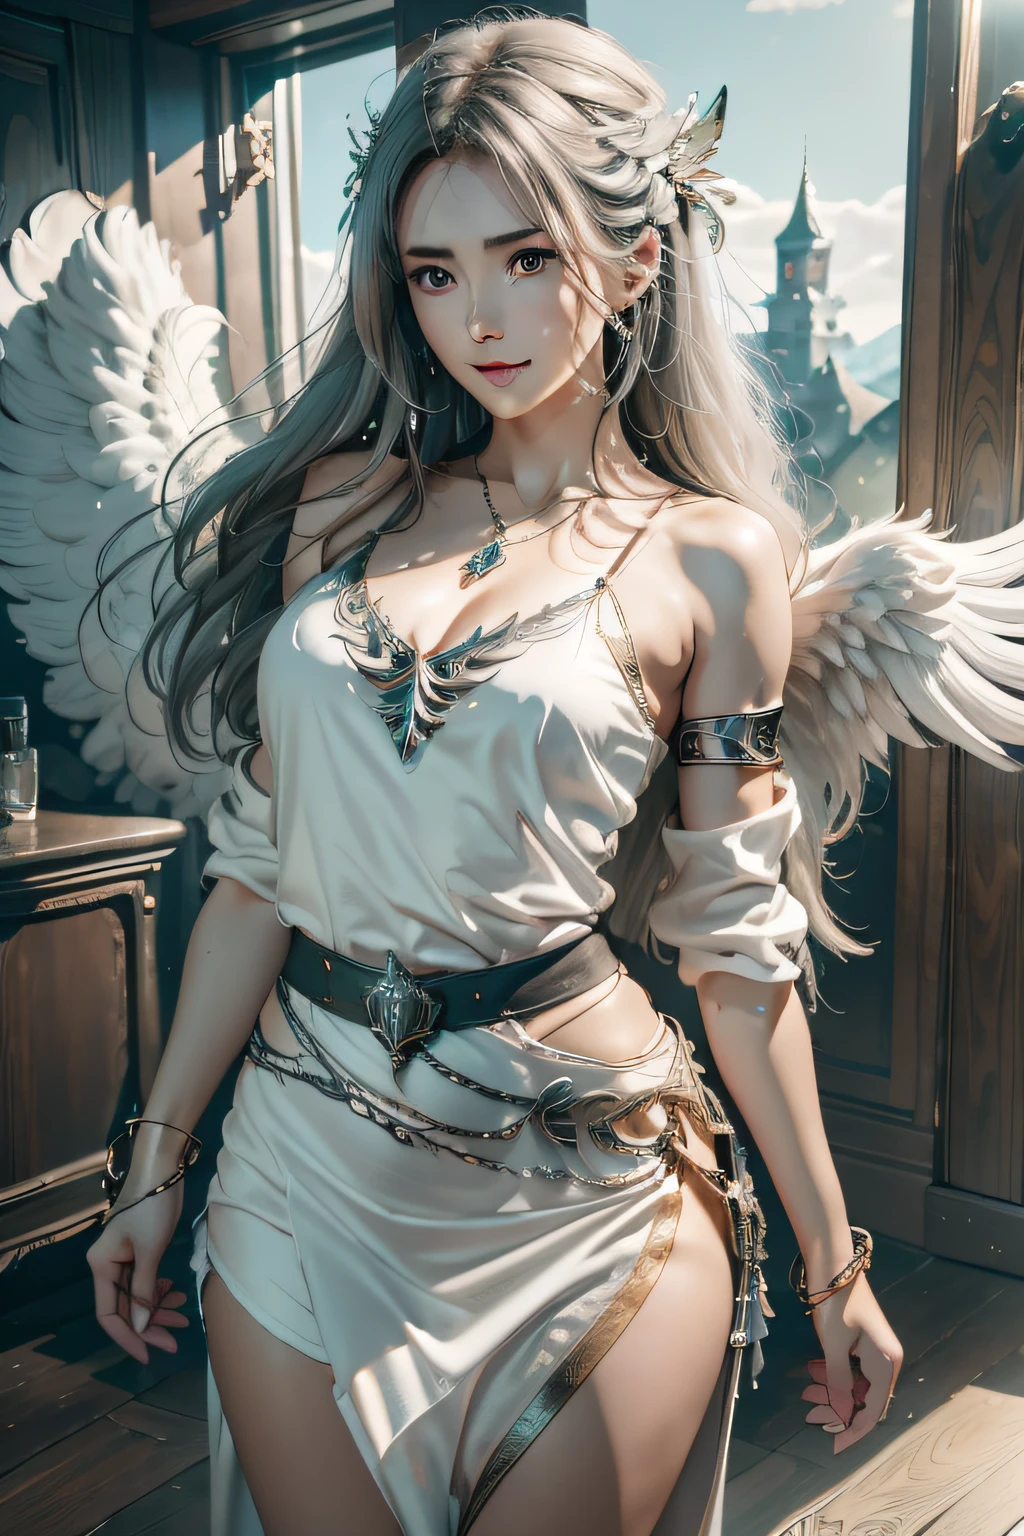 1girl in, solo, offcial art, unity 8k wall paper, ultra - detailed, prettify、Aesthetic, tmasterpiece, top-quality, Photorealsitic, A female angel、It has 6 large white wings on its back:2.0、Wings of a bird of prey、Blazing Angel、Silver armor:2.0、Silver gauntlet、Silver Insoles、White fabric、Hair ornaments with small wings、valkyrie、Very large wide sword、Glowing angel circle、angelic halo:2.0、Light magic、depth of fields, Fantastic atmosphere, calm color palette, Soft Shading、You can see the forest in the distance、See remote mountain castles、ellegance、Full body like、busty figure、Large full breasts、wide waist、Floating in the air:2.0、Flying in the sky:2.0、Fry high in the air、Sky on the steppe、You can see the castle on the hill in the distance